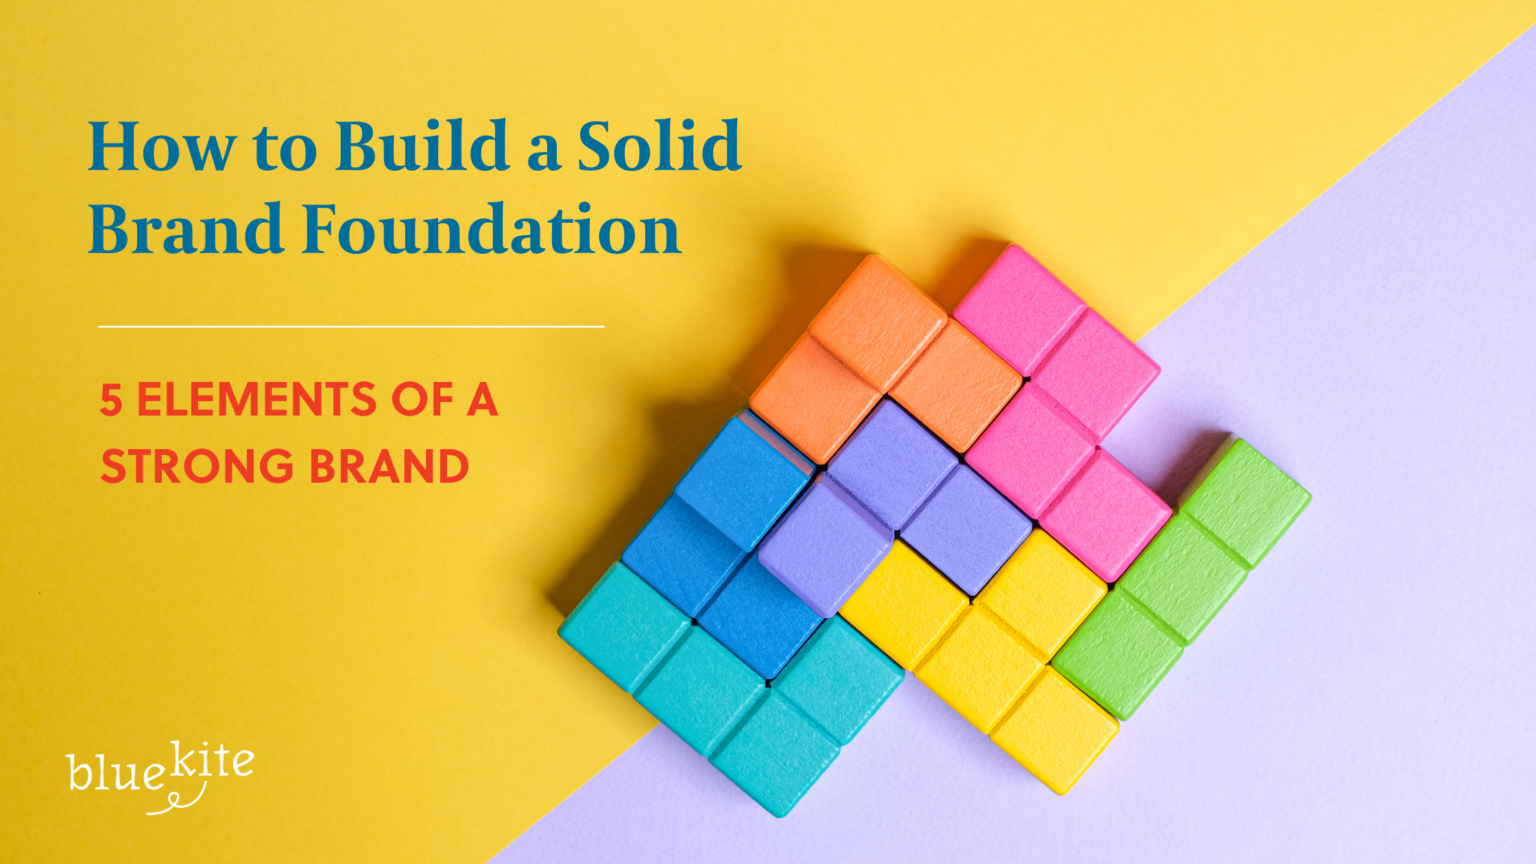 How to build a solid brand foundation